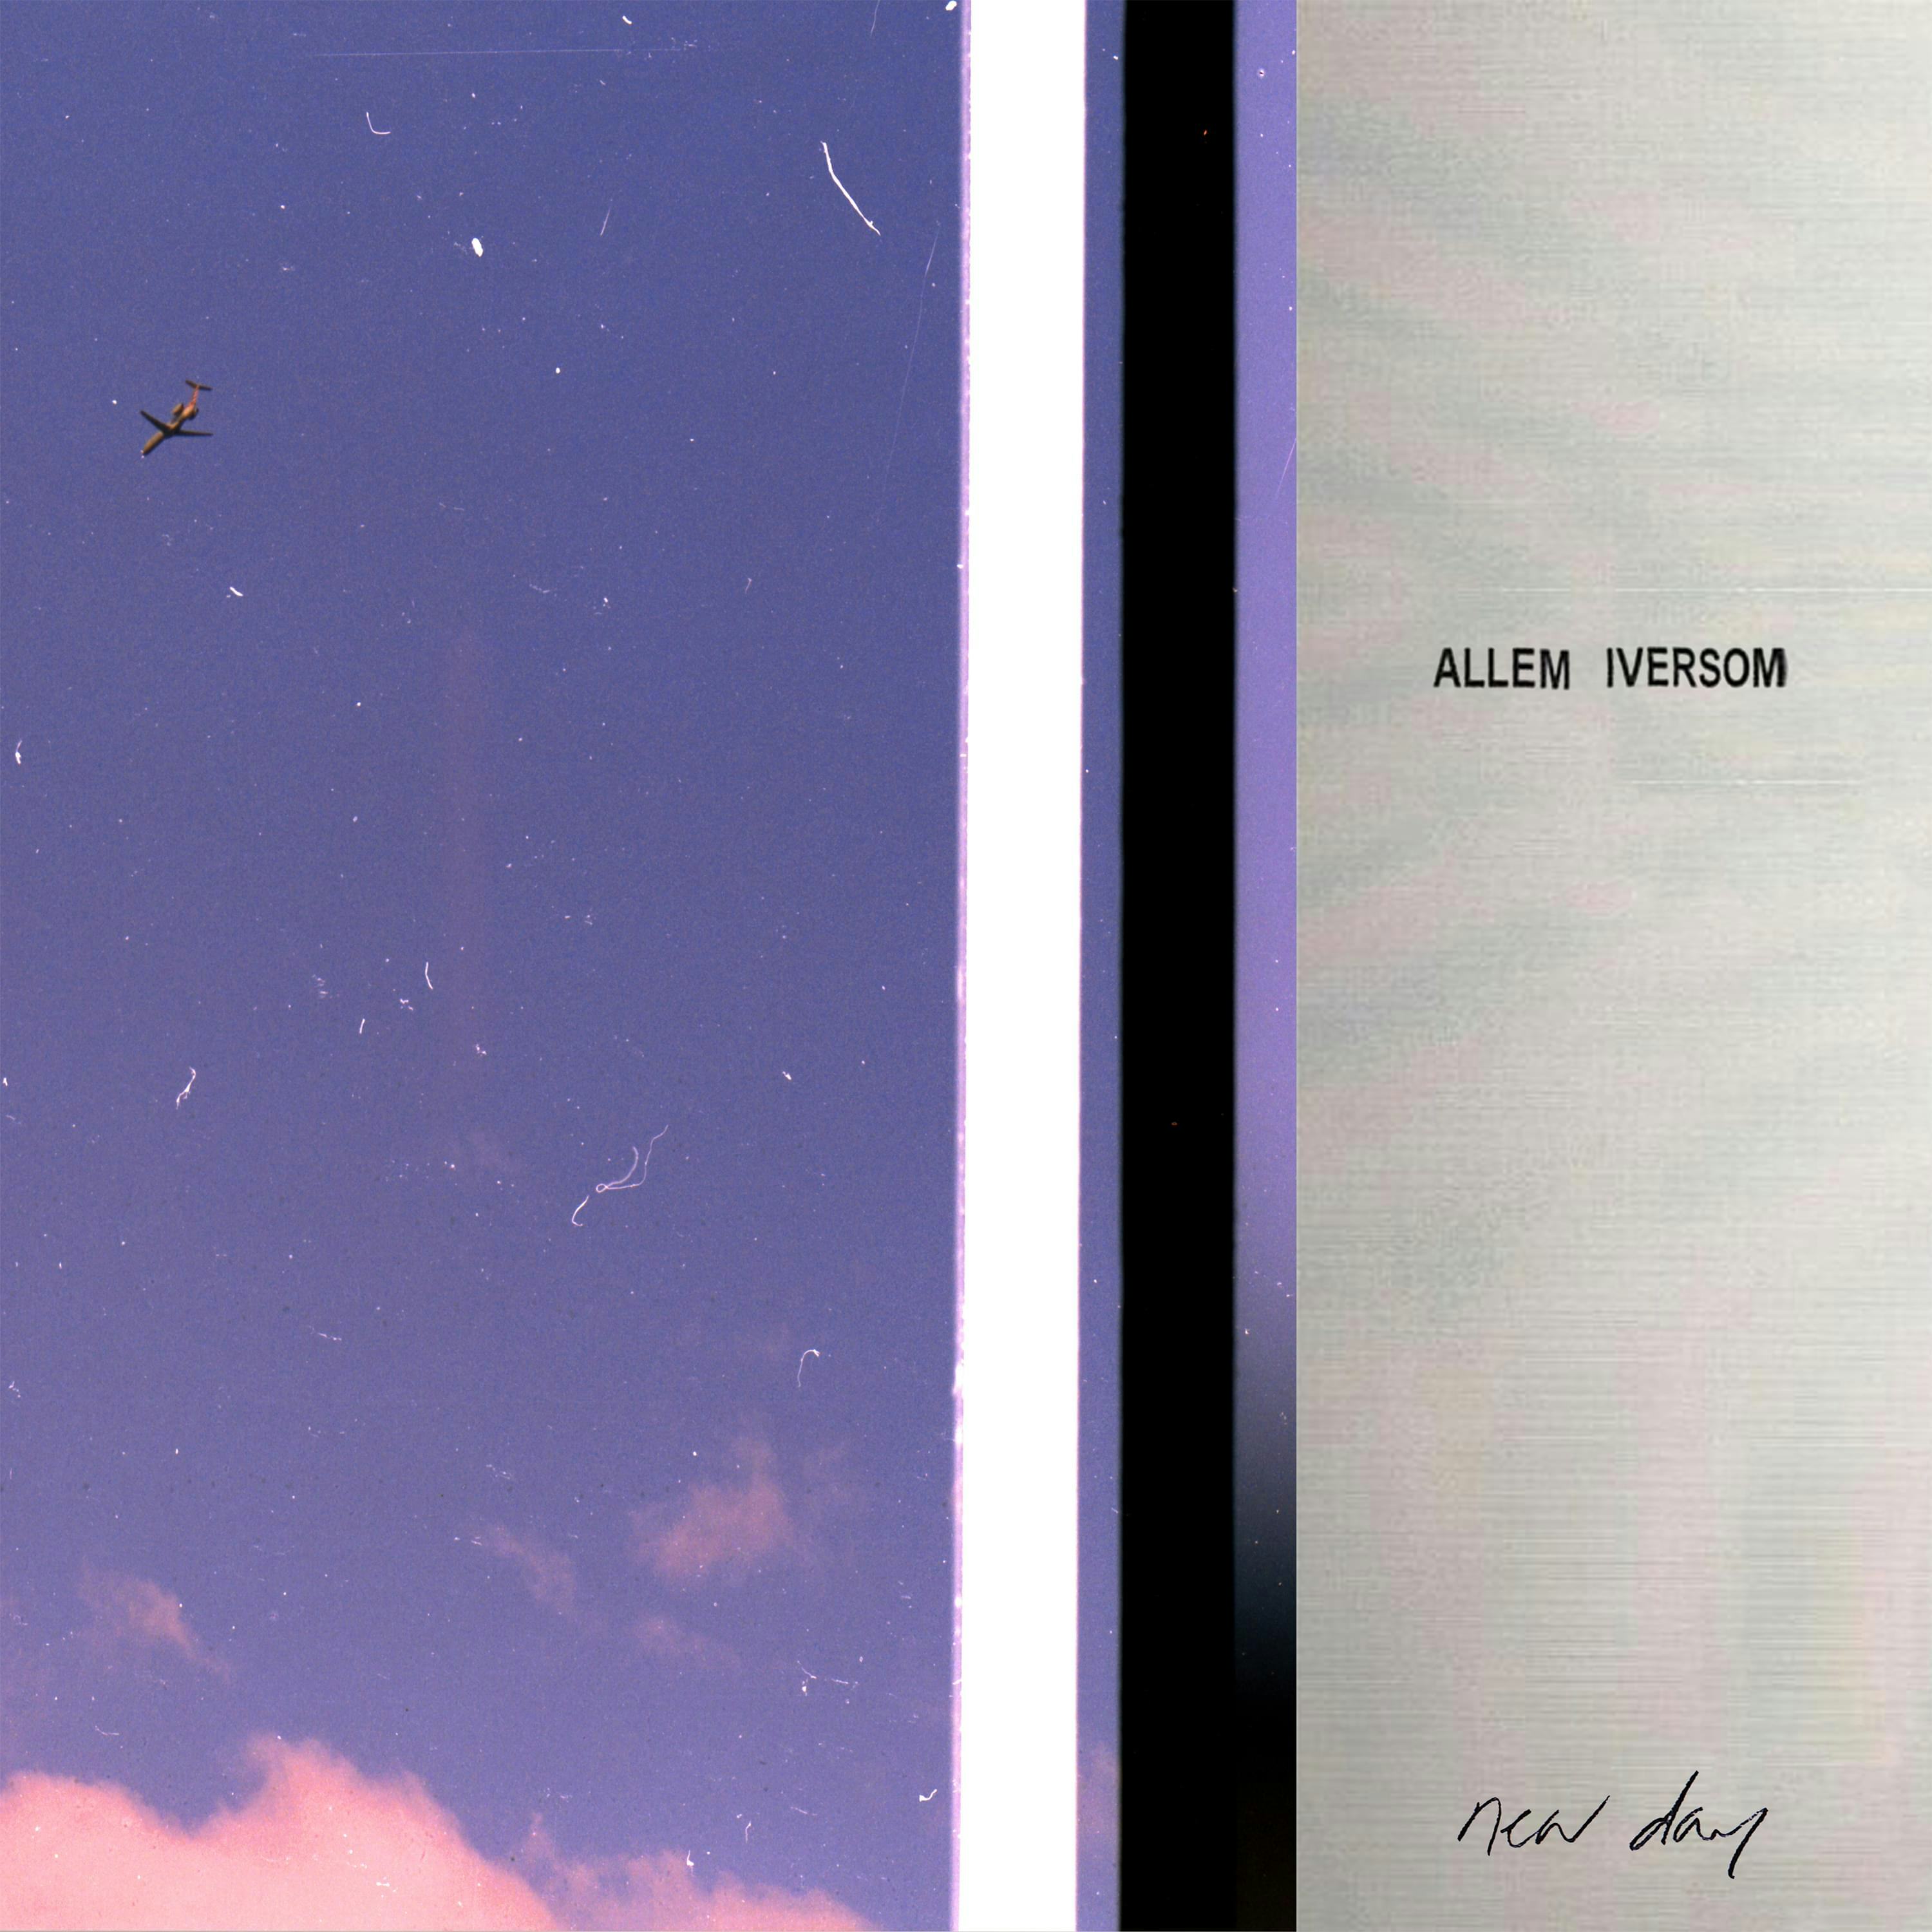 Cover art for suns out by allem iversom